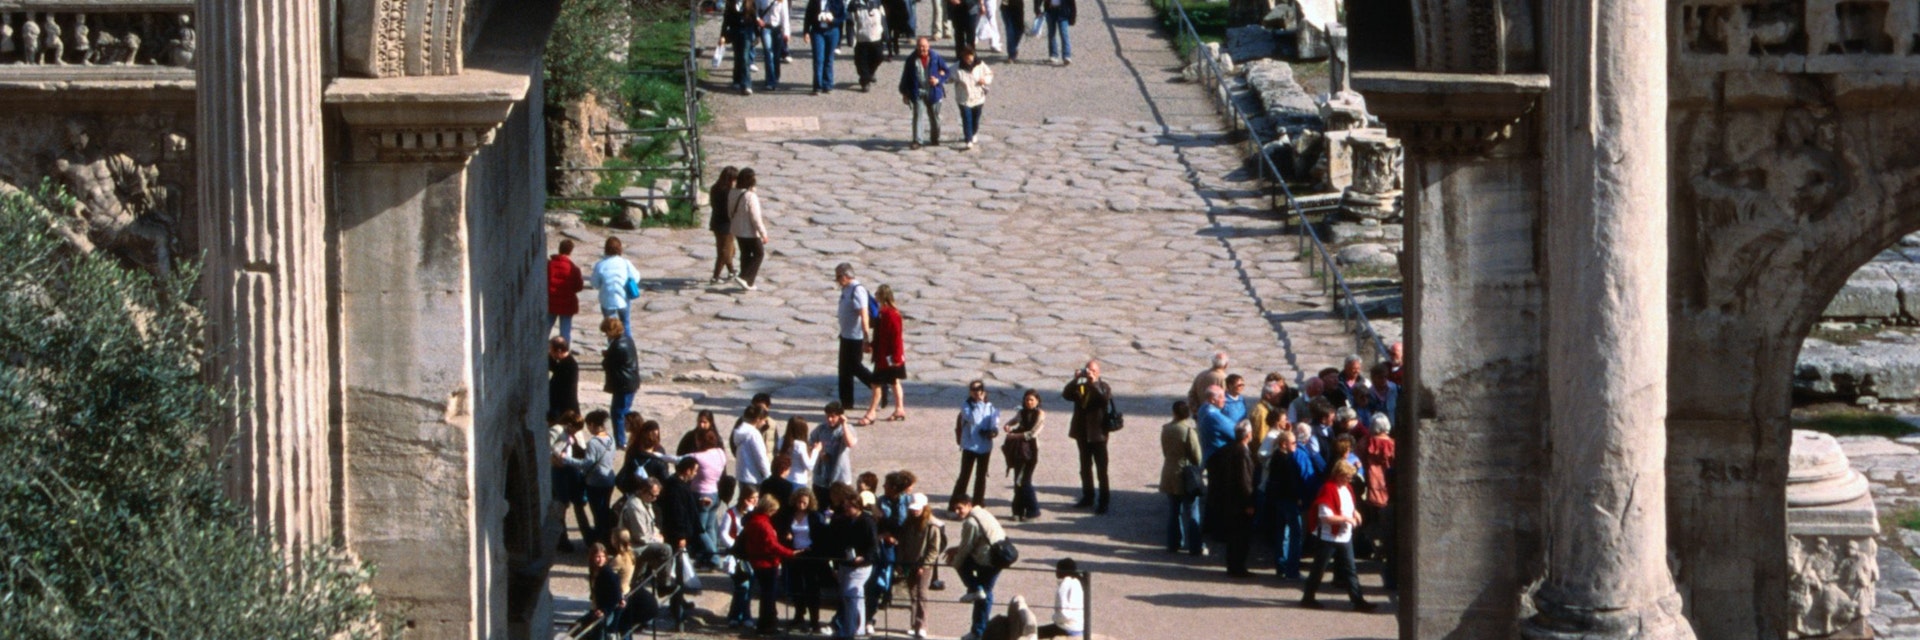 Crowds of tourists on a cobbled path behind Arco di Settimio Severo, Roman Forum.